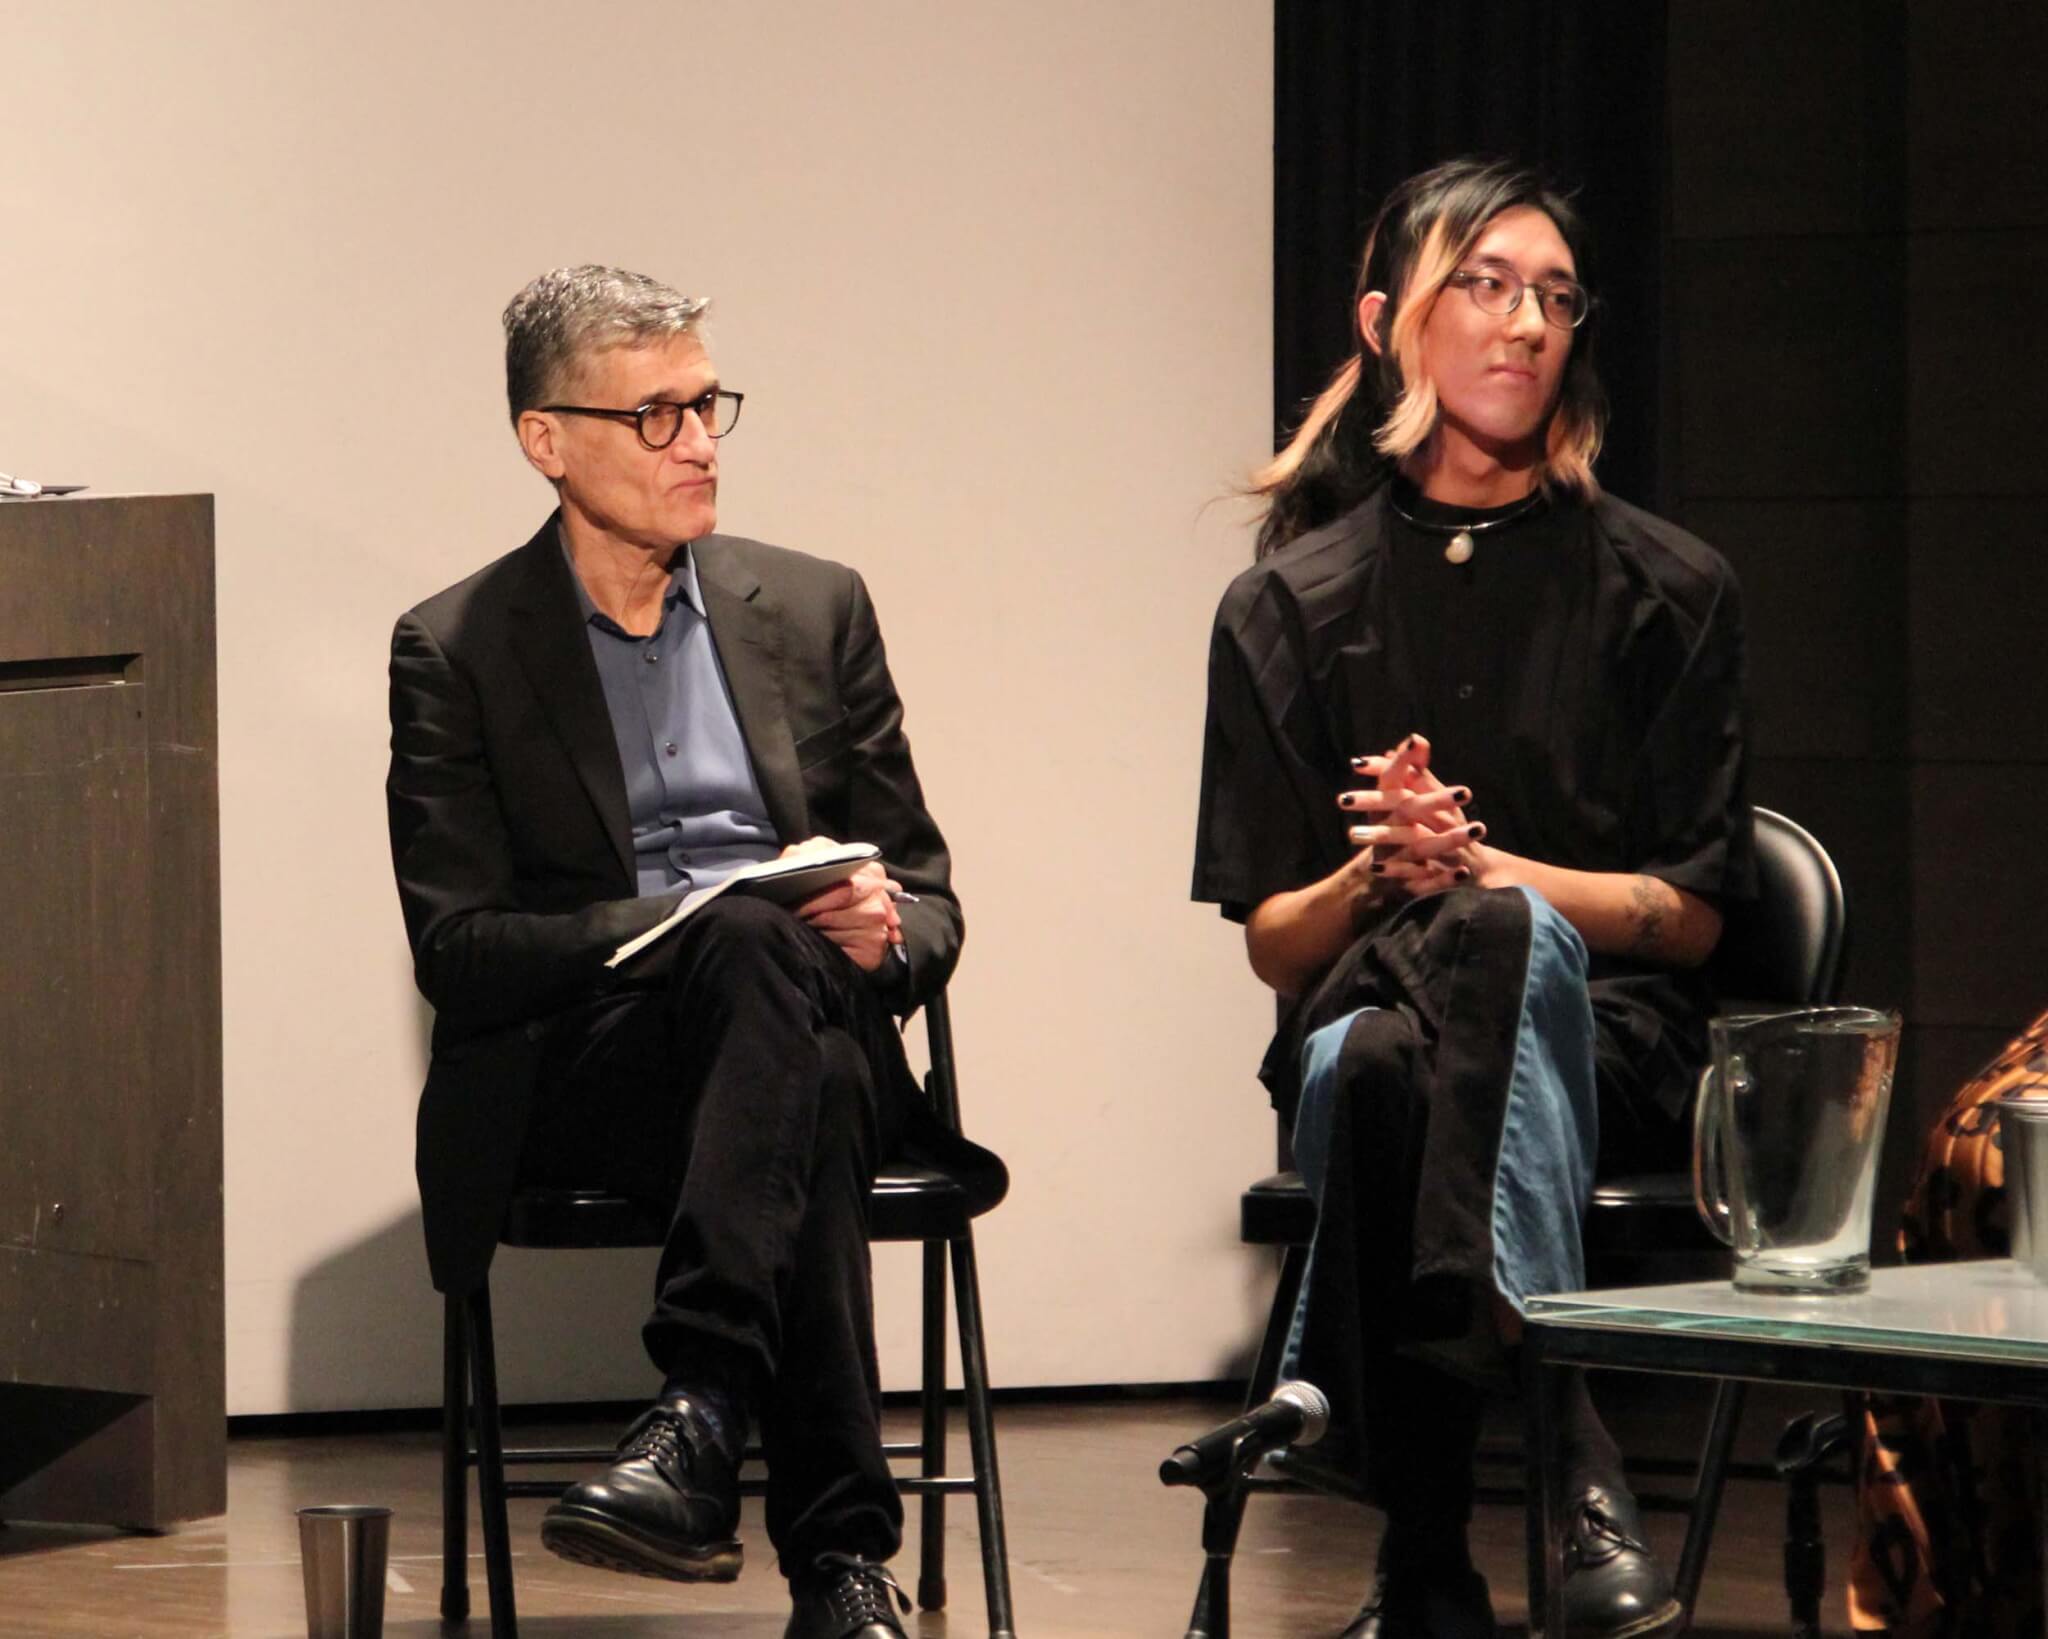 The Architectural League hosted Joel Sanders and Seb Choe in a talk on MIXmuseum Study